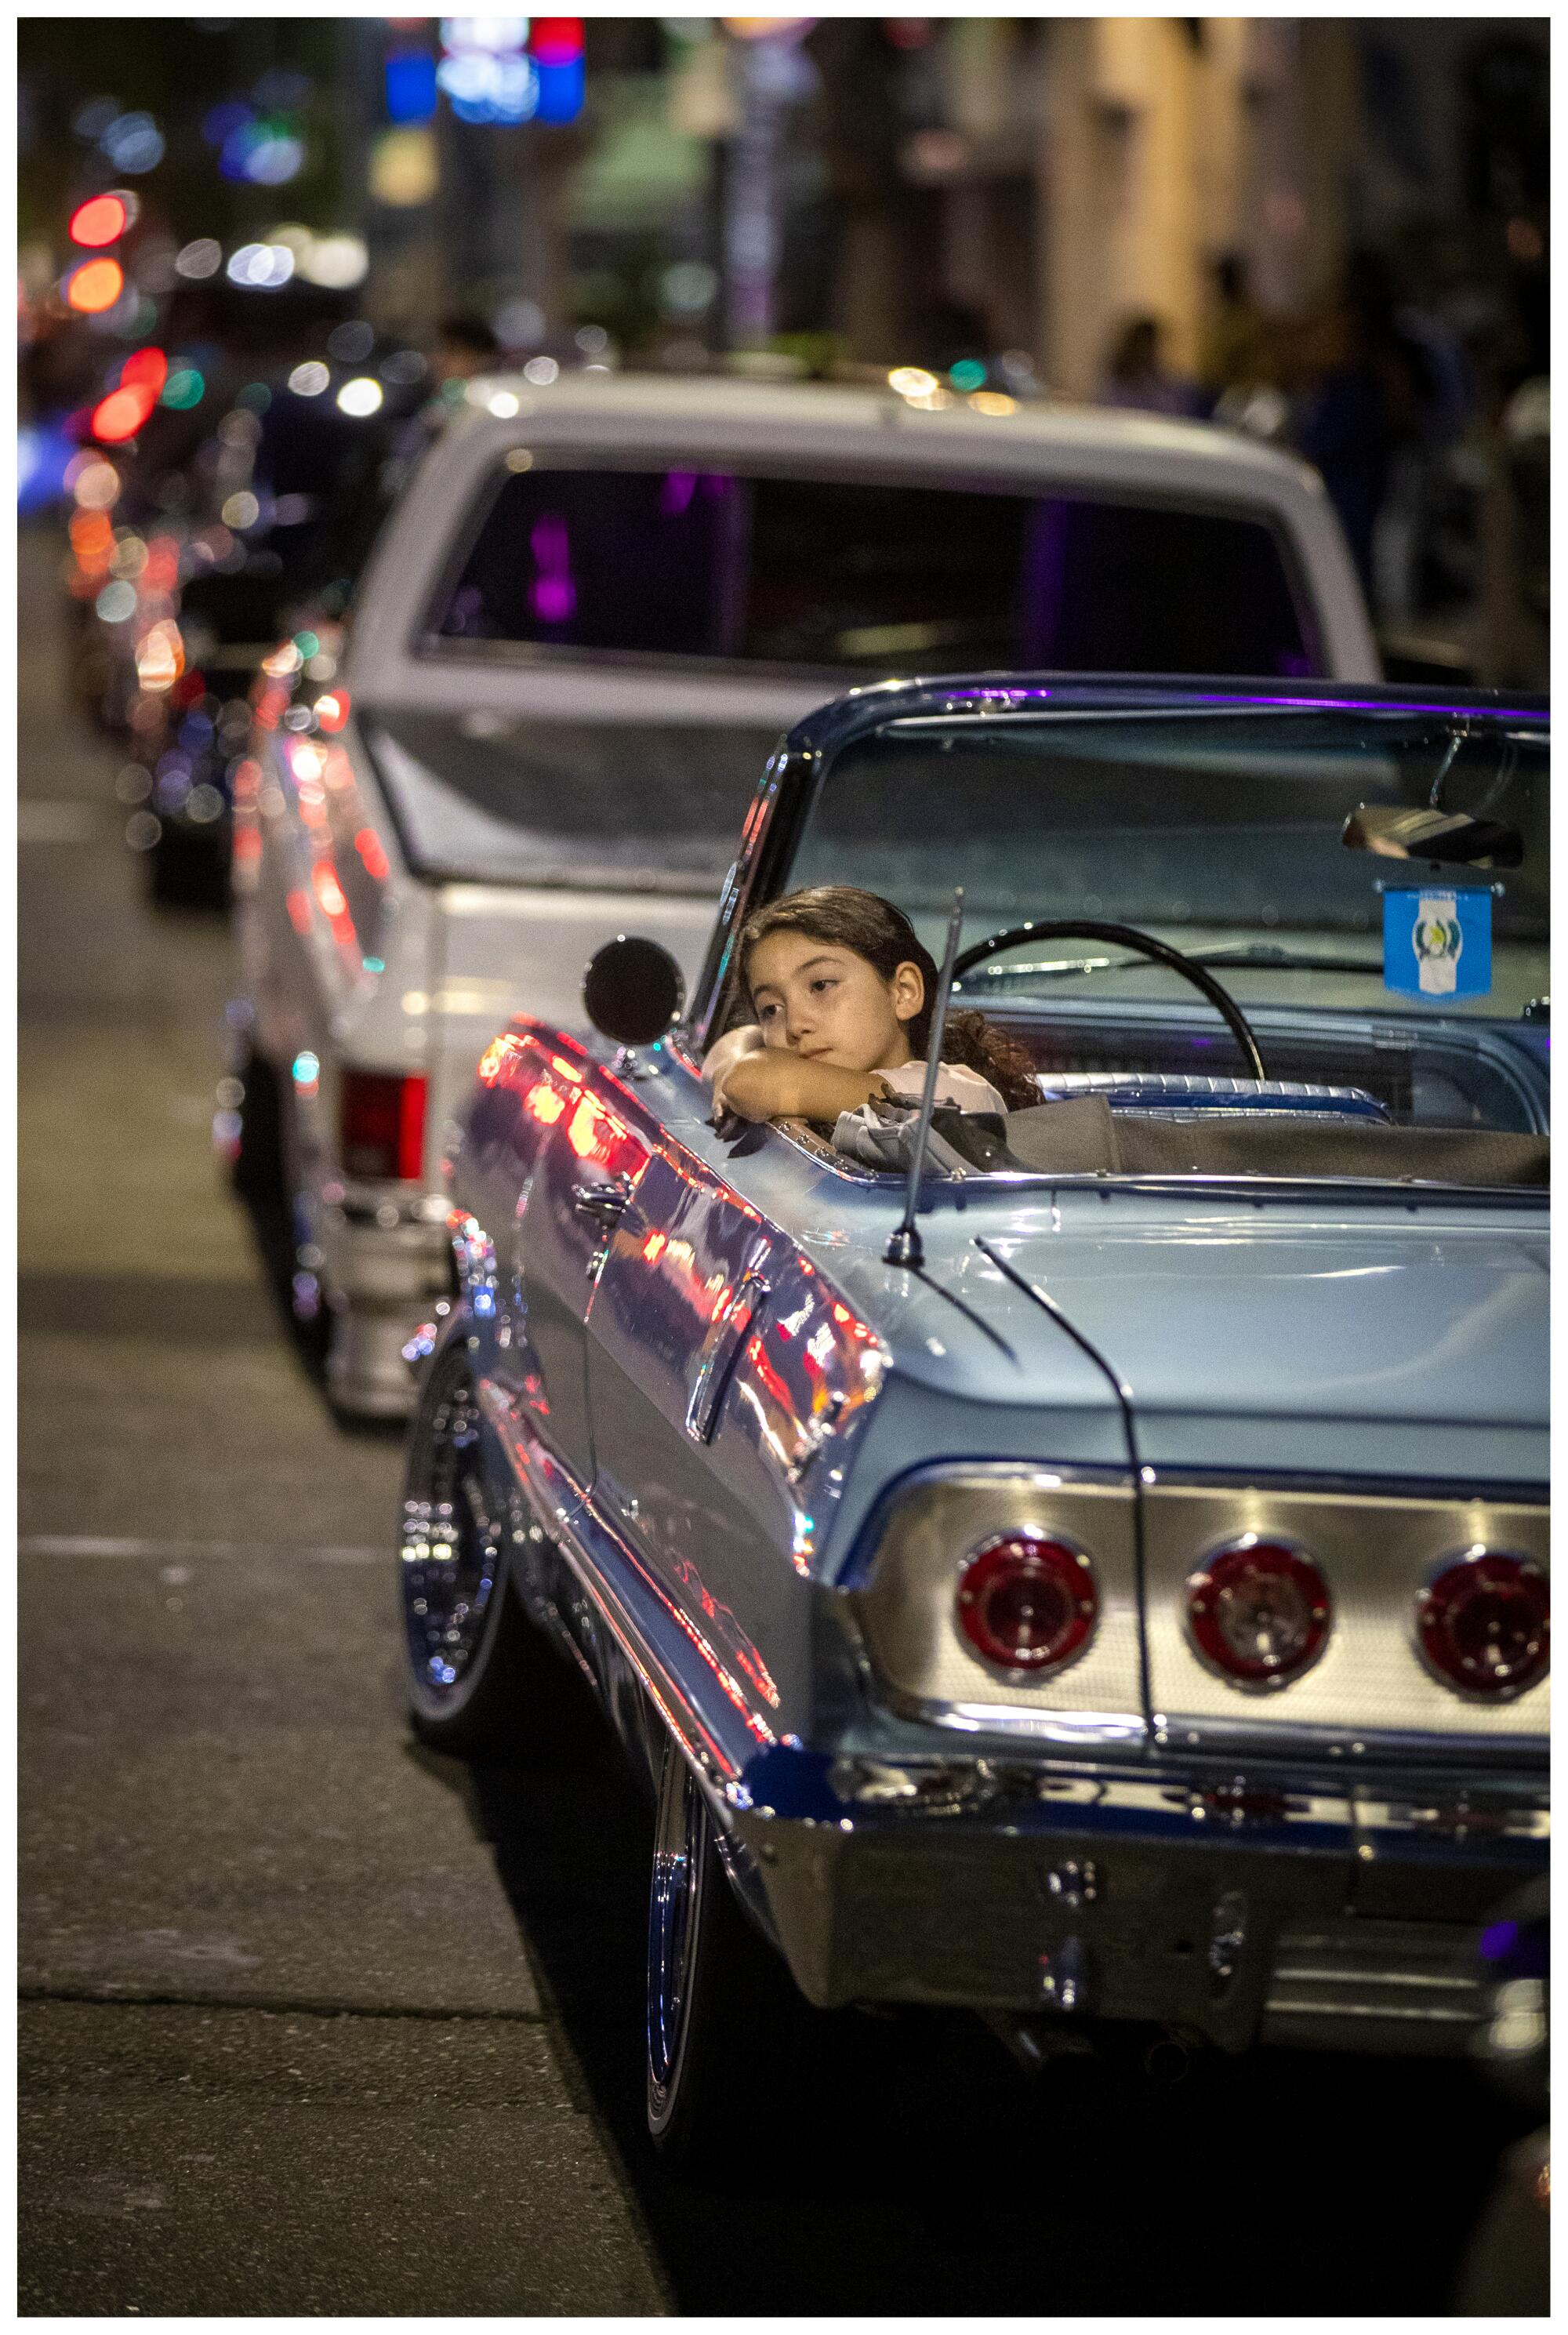 Karla Ramirez, 8, sits in her family's 1963 Chevrolet Impala Super Sport during Van Nuys Cruise Night.